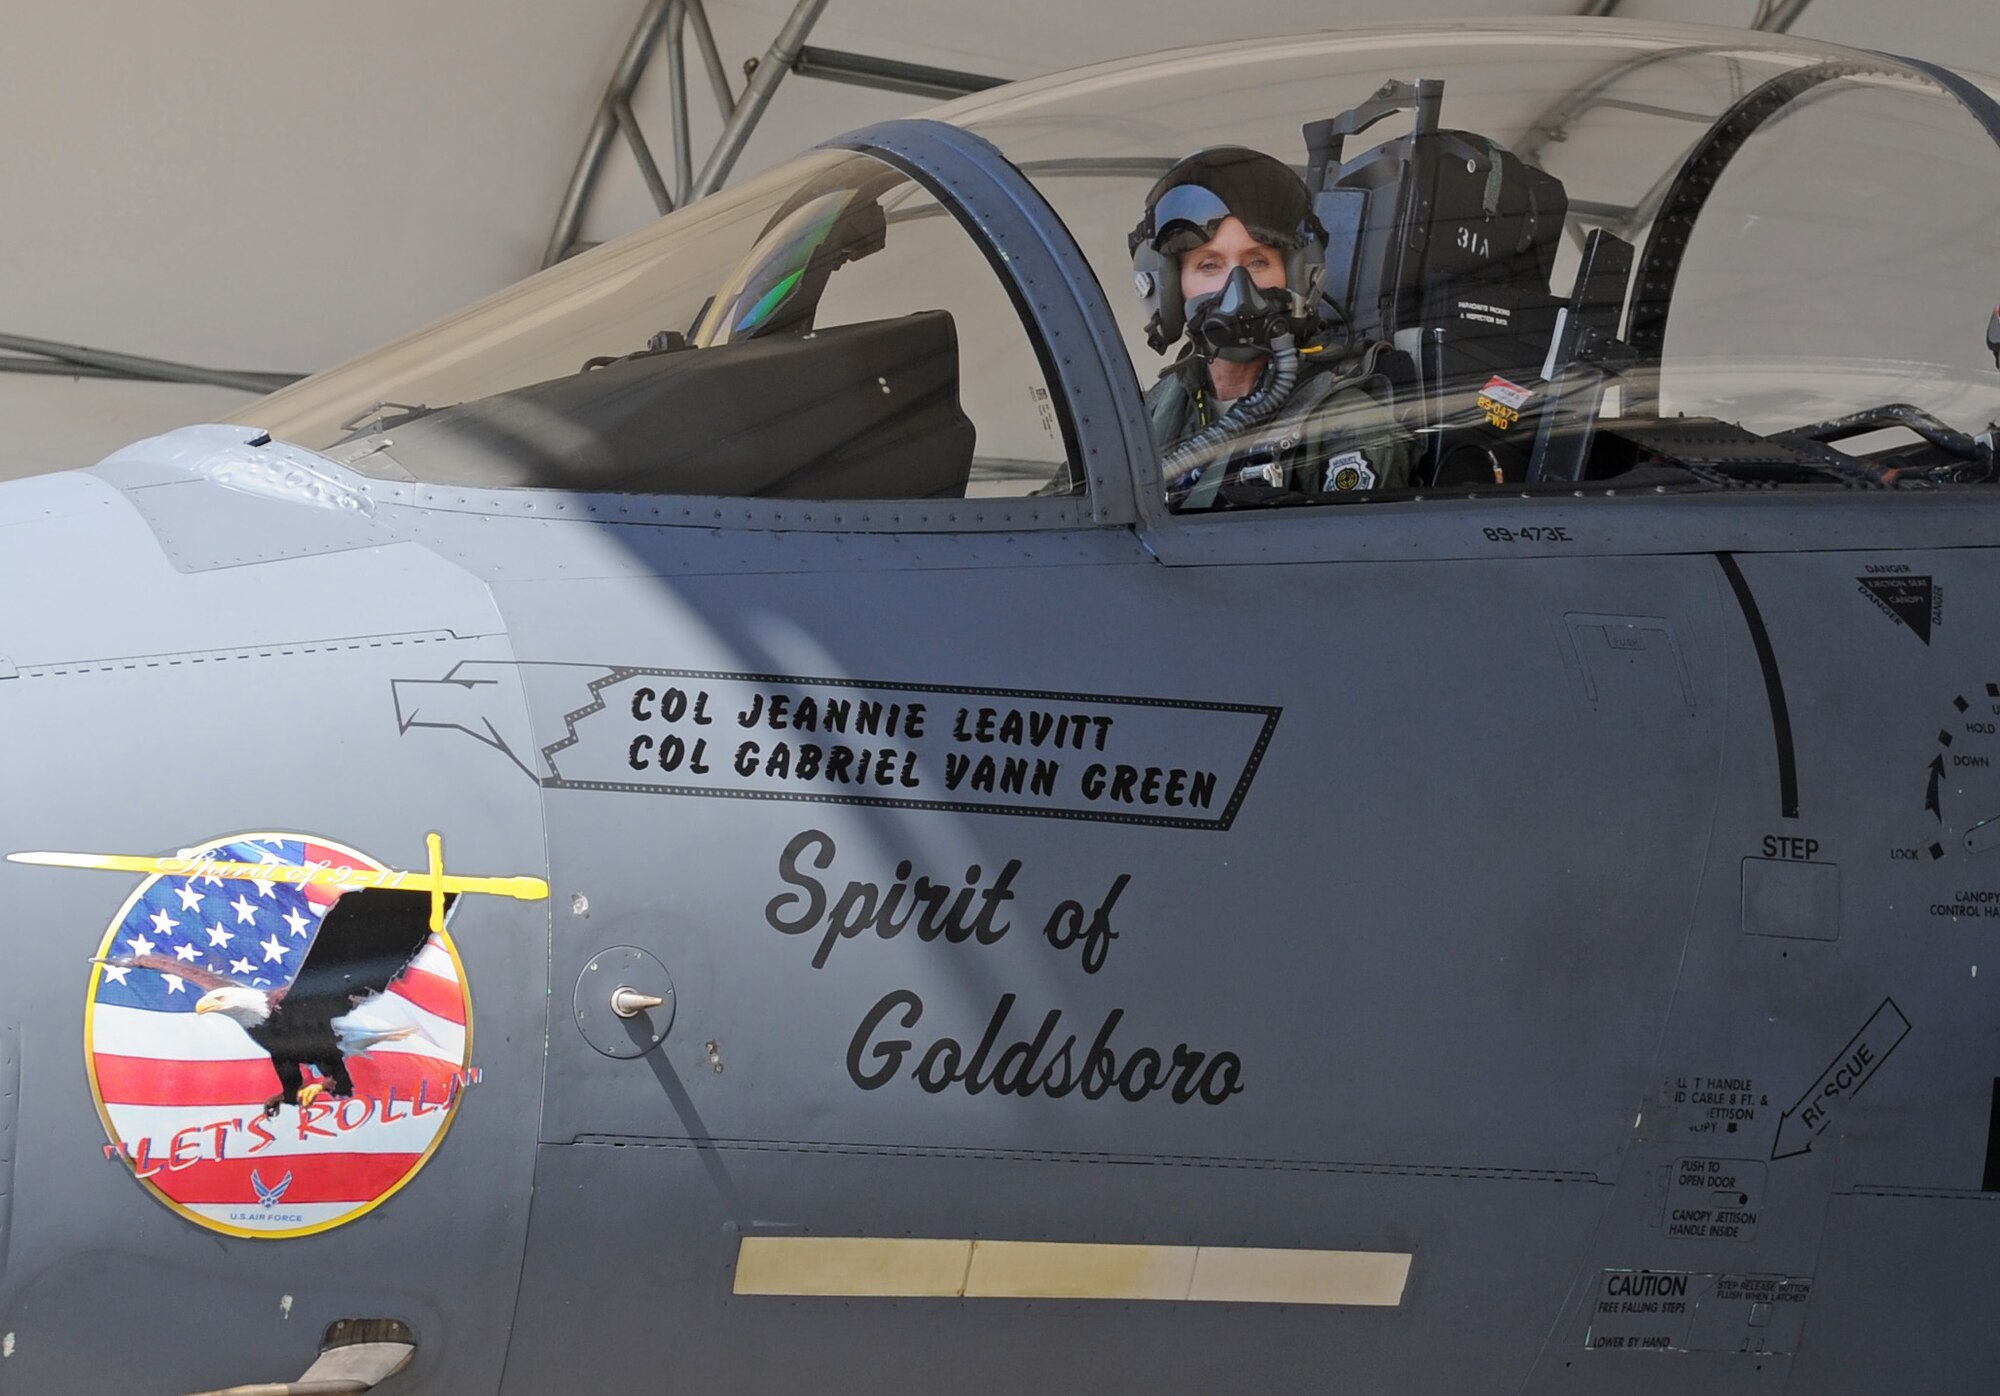 Col. Jeannie Leavitt in her F-15E Strike Eagle at Seymour Johnson Air Force Base, N.C. Leavitt, the first female fighter pilot, now commands the 4th Fighter Wing at Seymour Johnson. (Air Force photo courtesy 4th Fighter Wing Public Affairs)